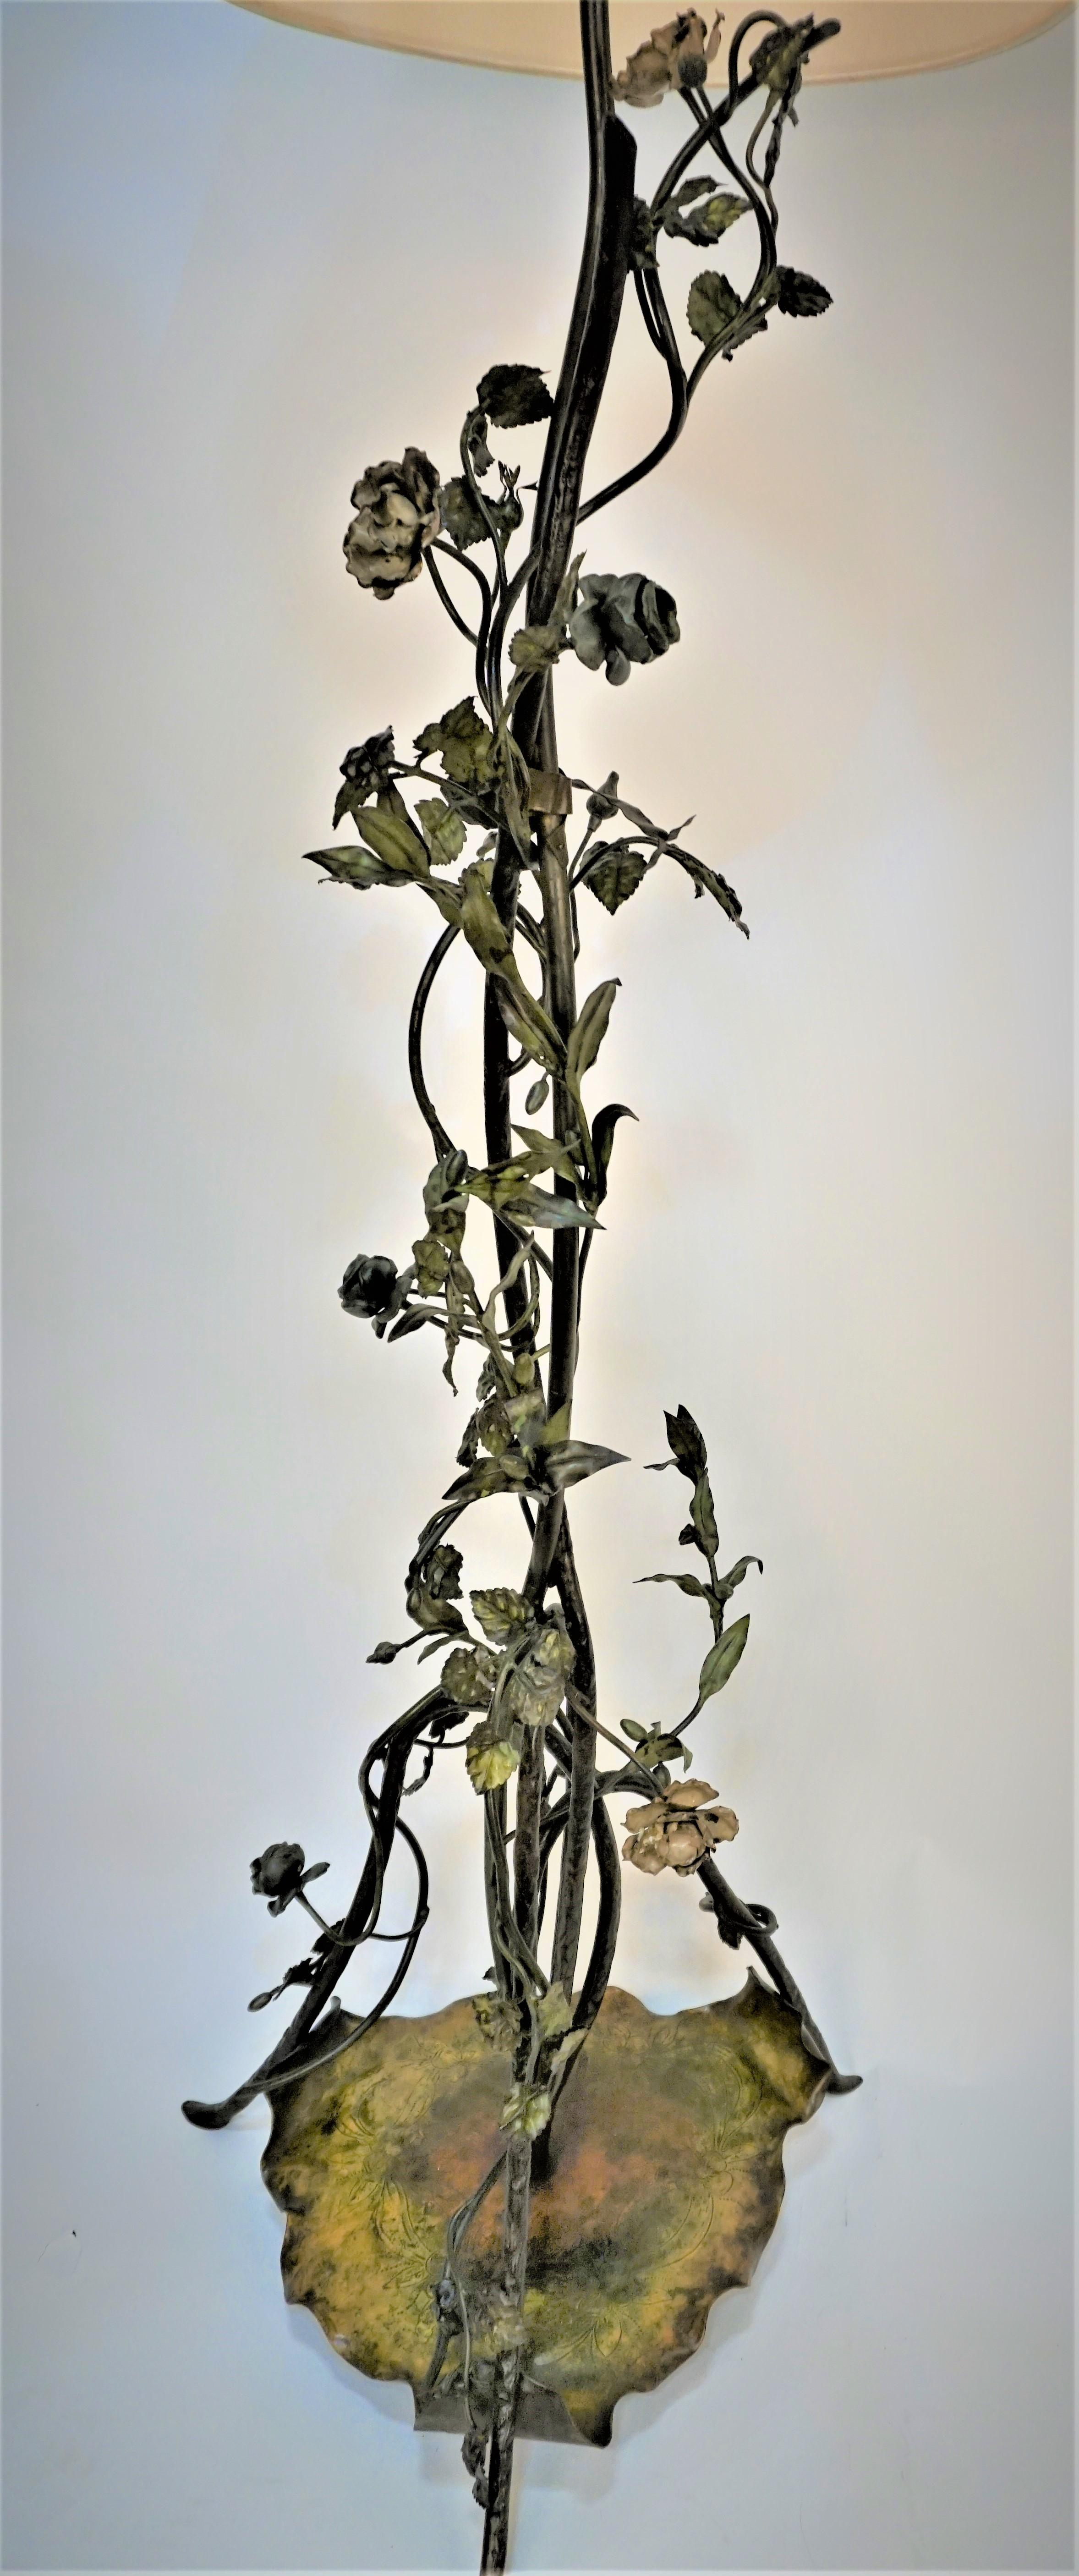 19th century painted and patinated bronze tall rose/flower plant oil floor lamp that has been modified and electrified with double pull chain socketed and fitted with silk lampshade.
Professionally rewired, 200watts max each light.